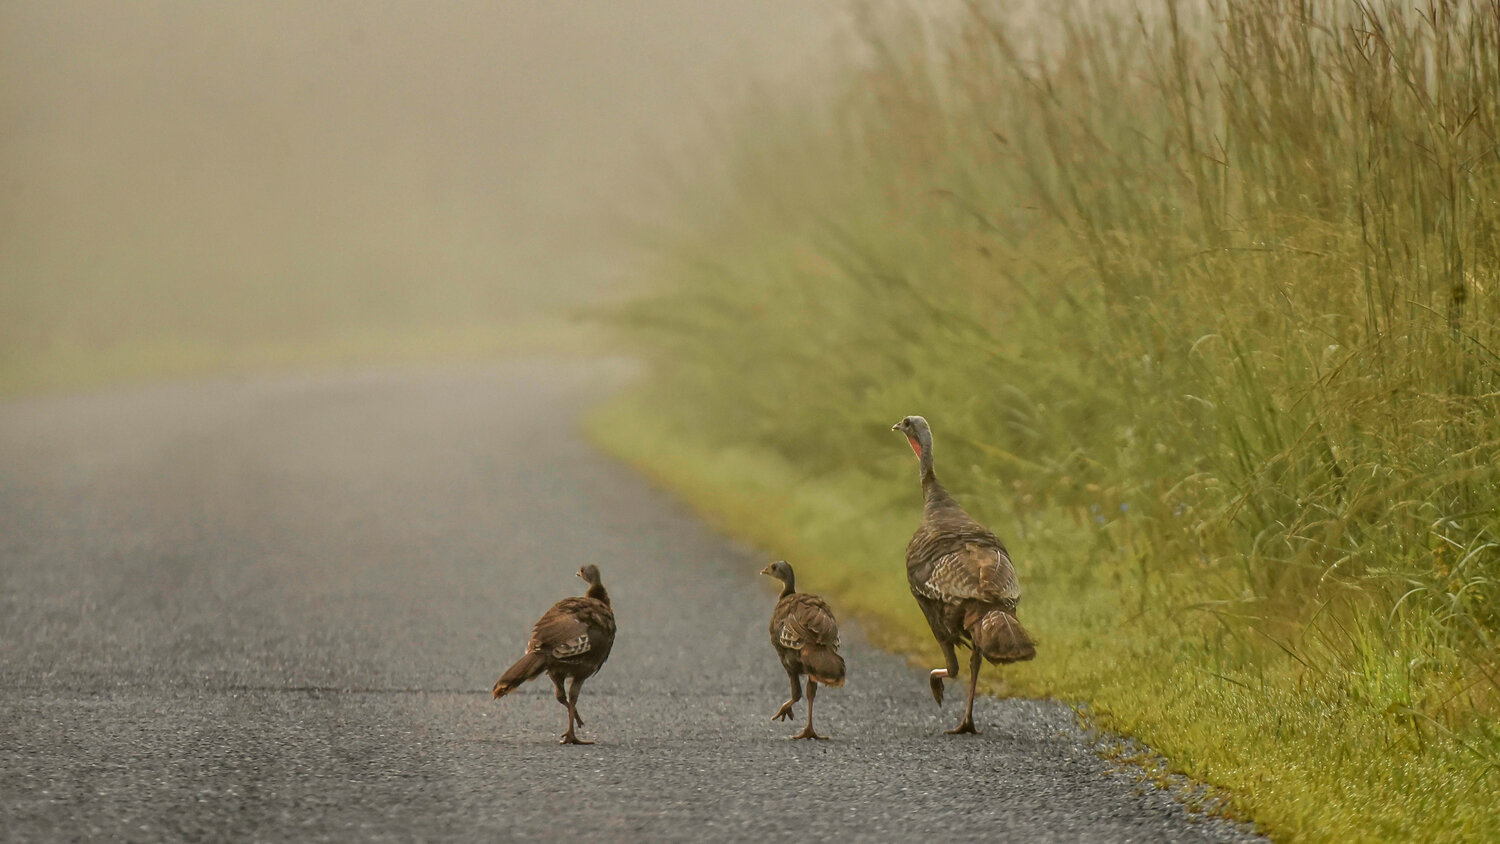 The winning photo from Delaware Department of Natural Resources and Environmental Control’s 2022 Delaware Watersheds Photo Contest was “Turkey Trot” by Kimberly Barksdale, taken while “leaving Bear Swamp” in the Leipsic River Watershed.